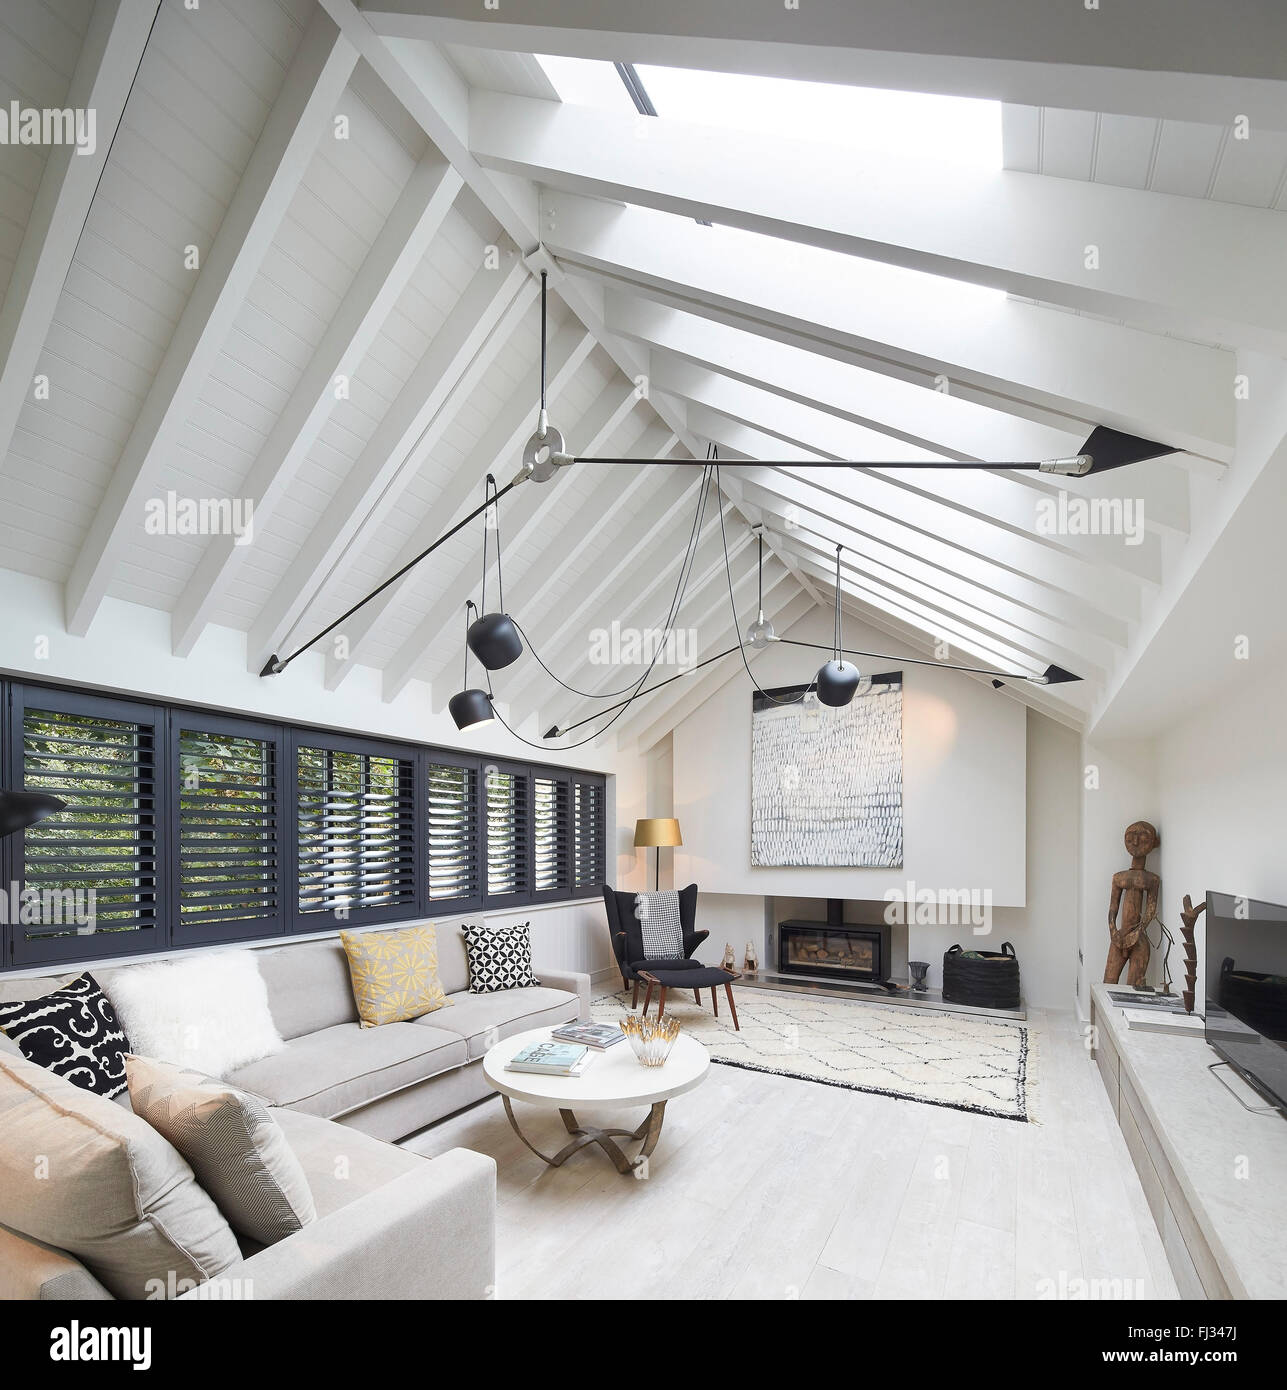 Living space with exposed gabled ceiling. Orleans Road, Twickenham, United Kingdom. Architect: Burwell Deakins Architects, 2015. Stock Photo